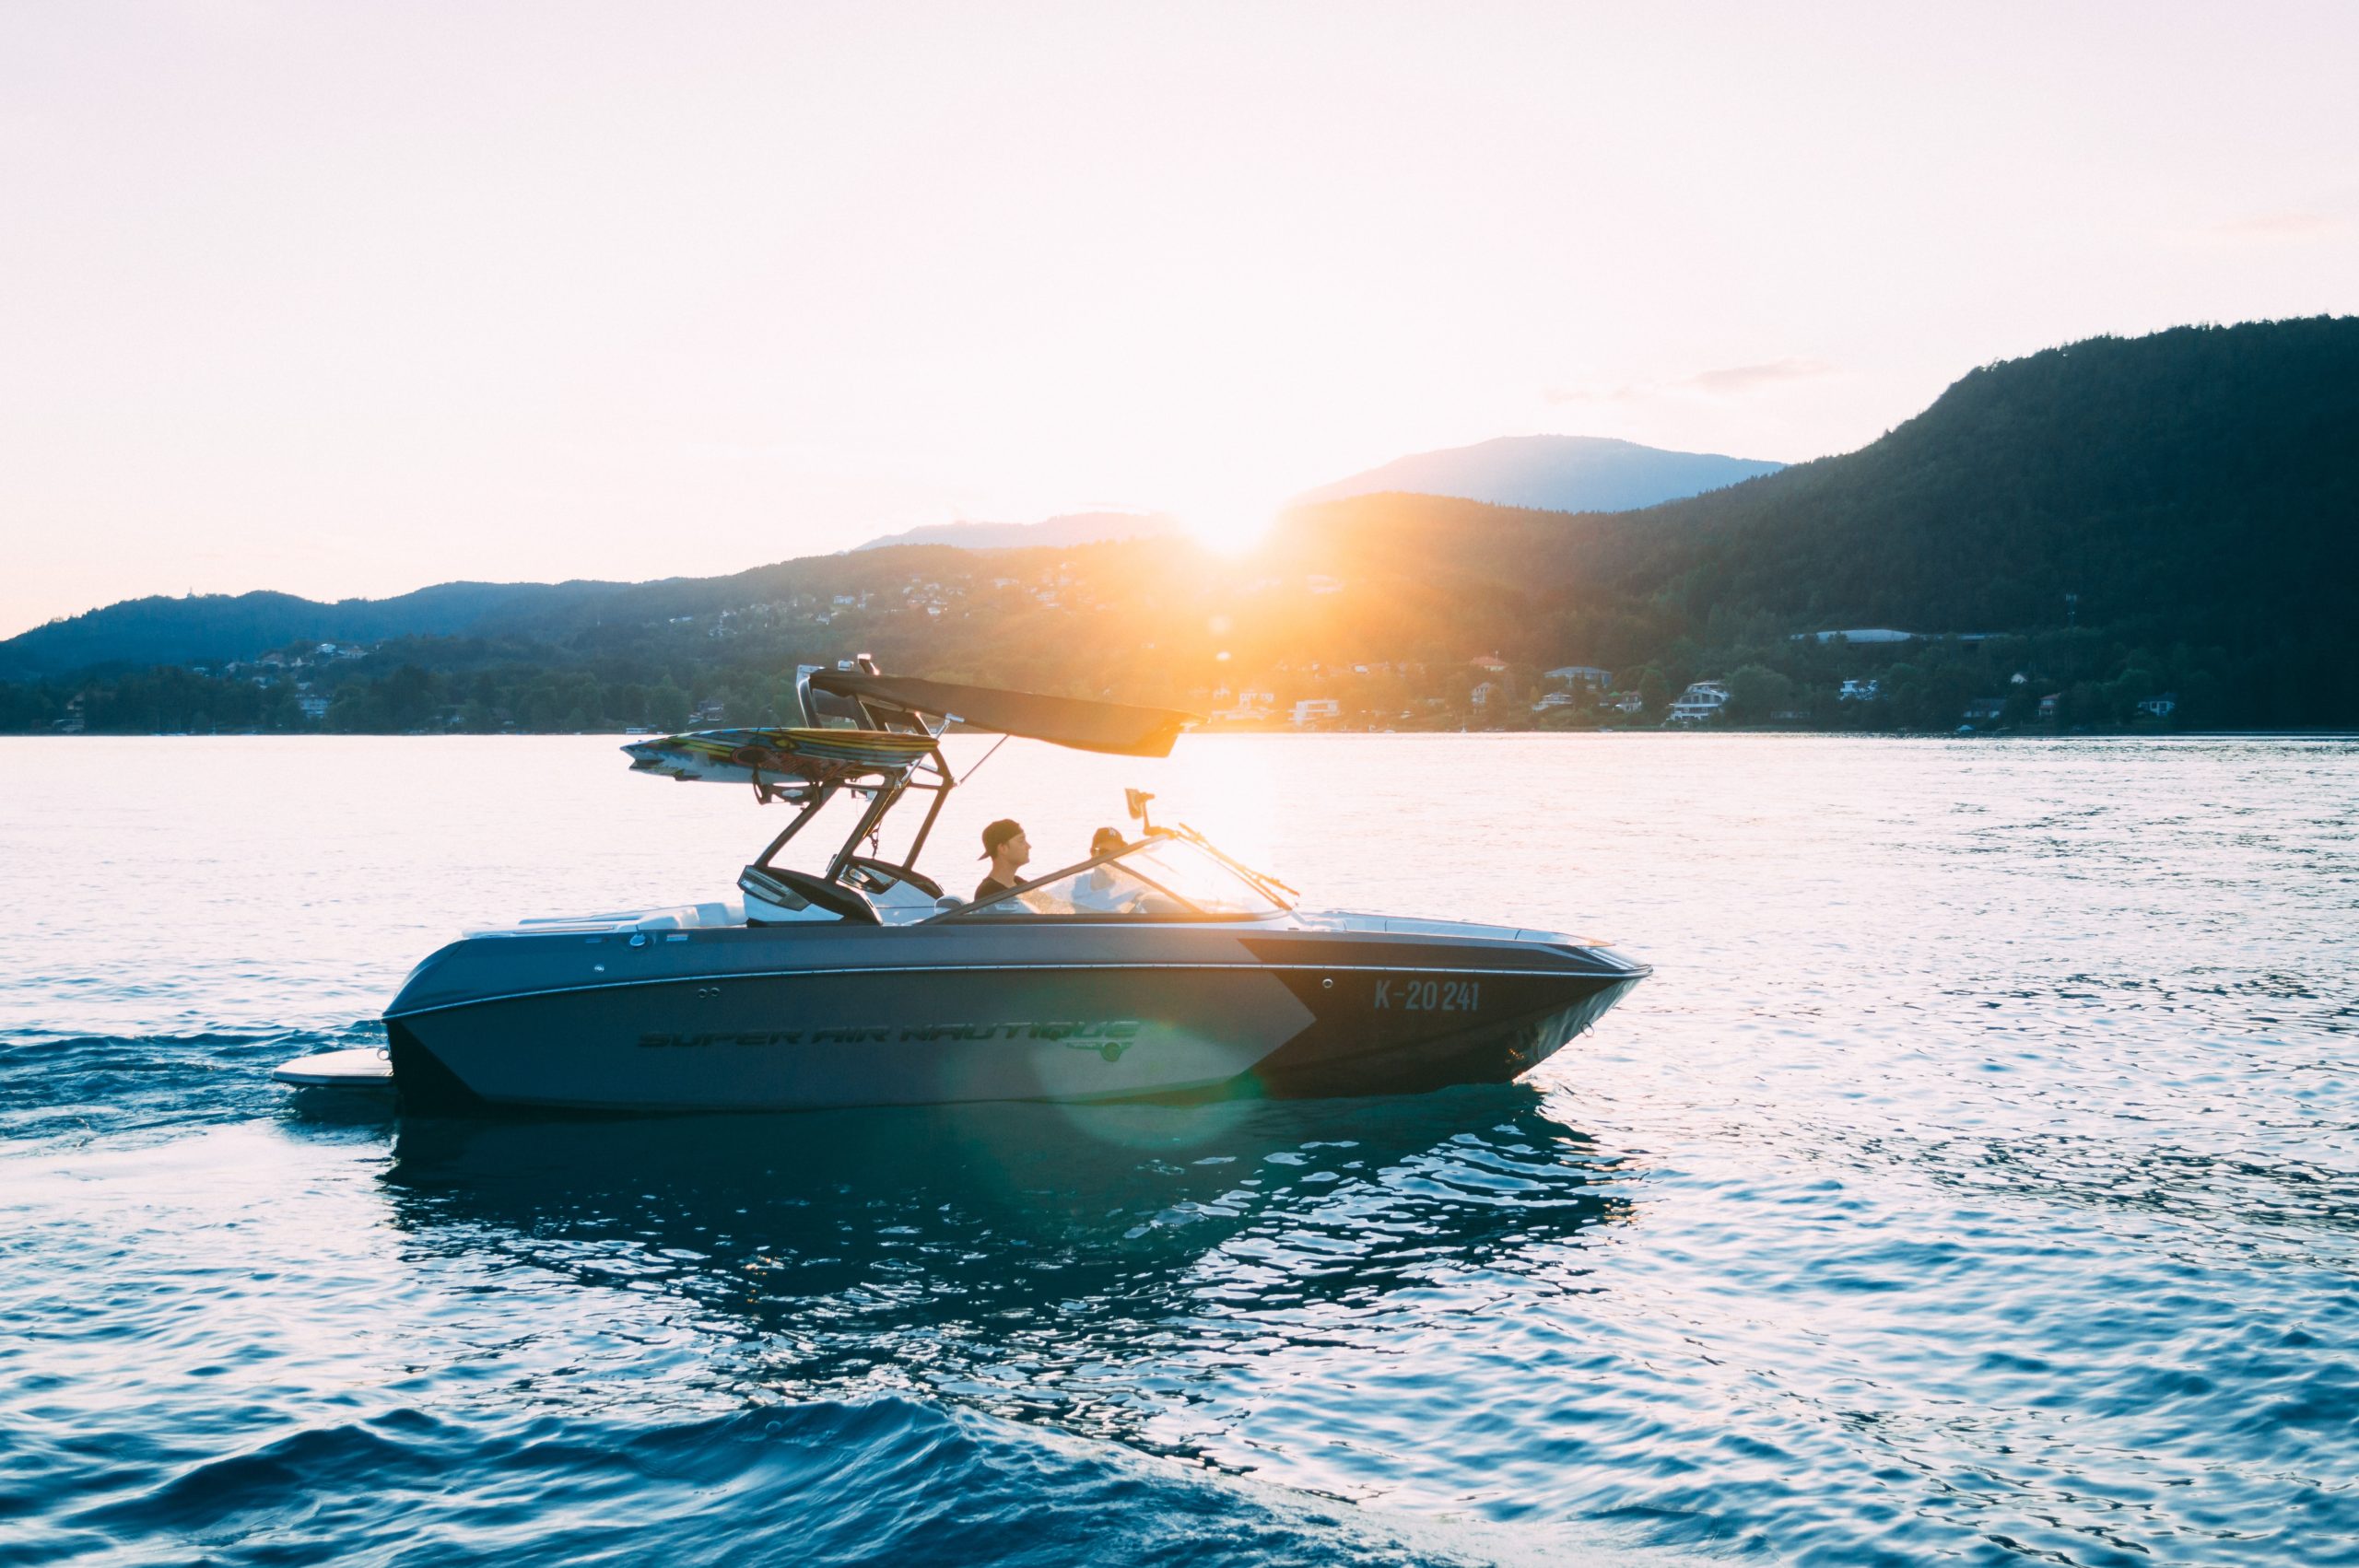 Frequently Asked Questions About Boating Under the Influence